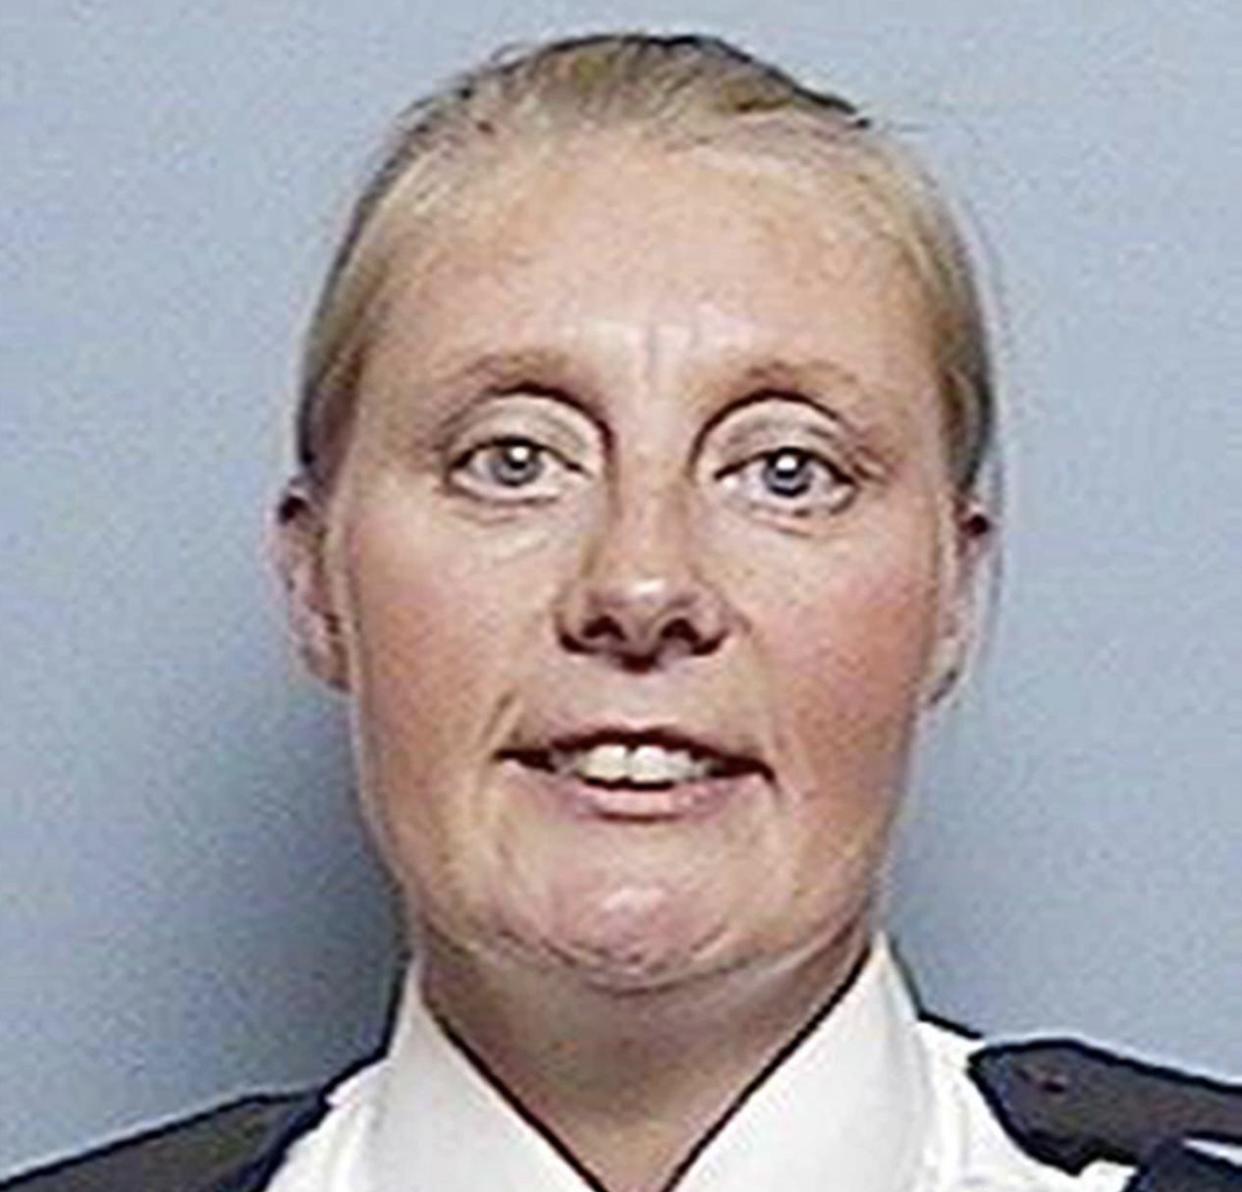 WPC Sharon Beshenivsky was shot while responding to a robbery at Universal Travel in Morley Street, Bradford, in 2005. (PA)